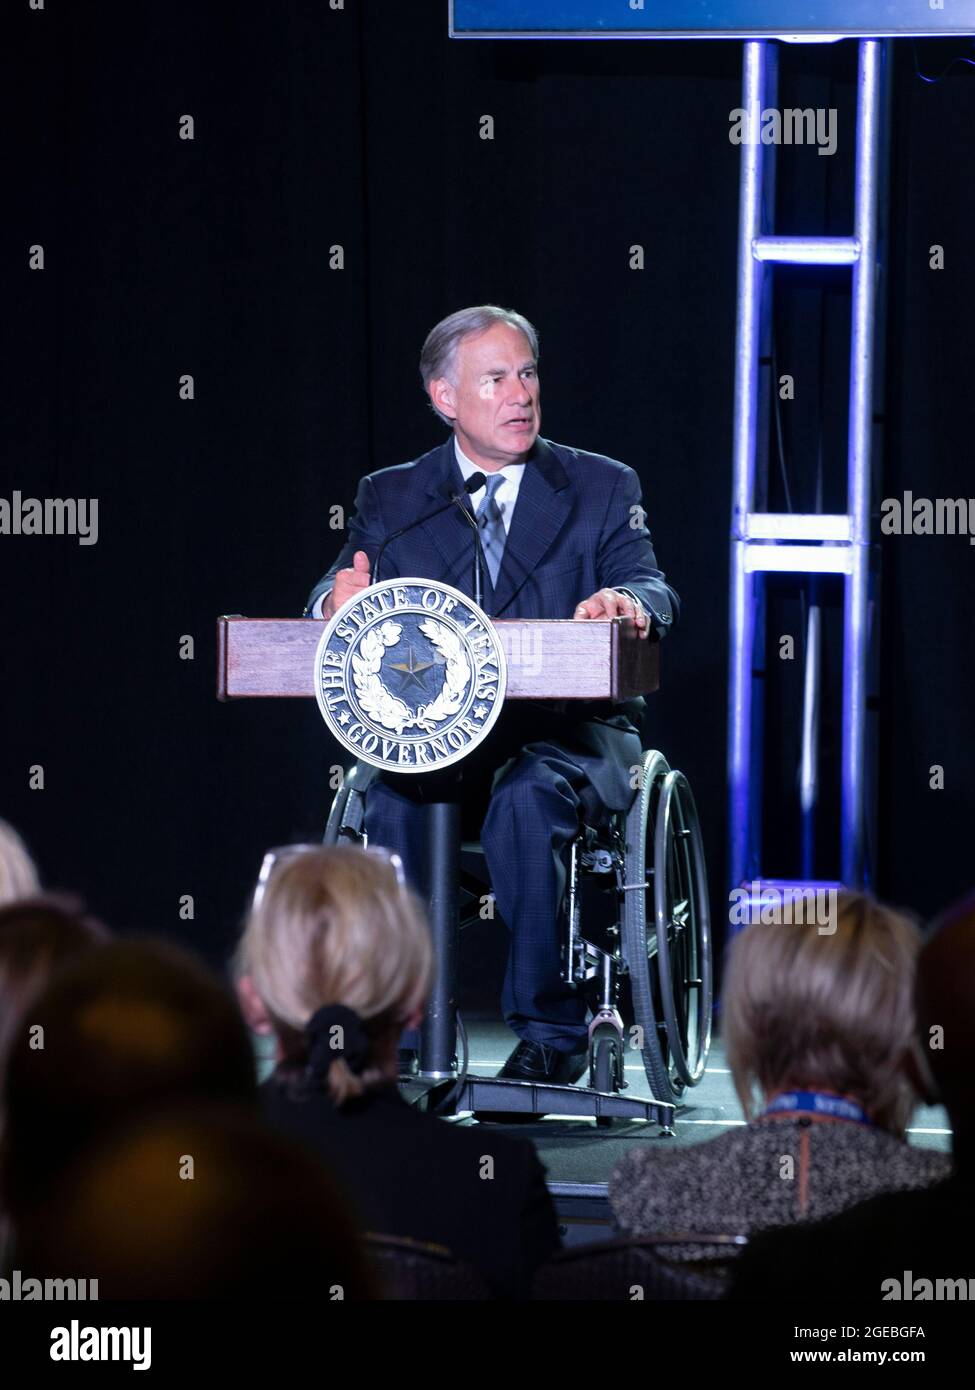 Texas Governor Greg Abbott speaks without a mask to a group of Texas business leaders in Austin on August 9th, 2021 -- eight days before a positive COVID-19 test on August 17th. The governor, who is tested daily, is receiving Regeneron monoclonal antibody treatment and has no reported symptoms. Stock Photo